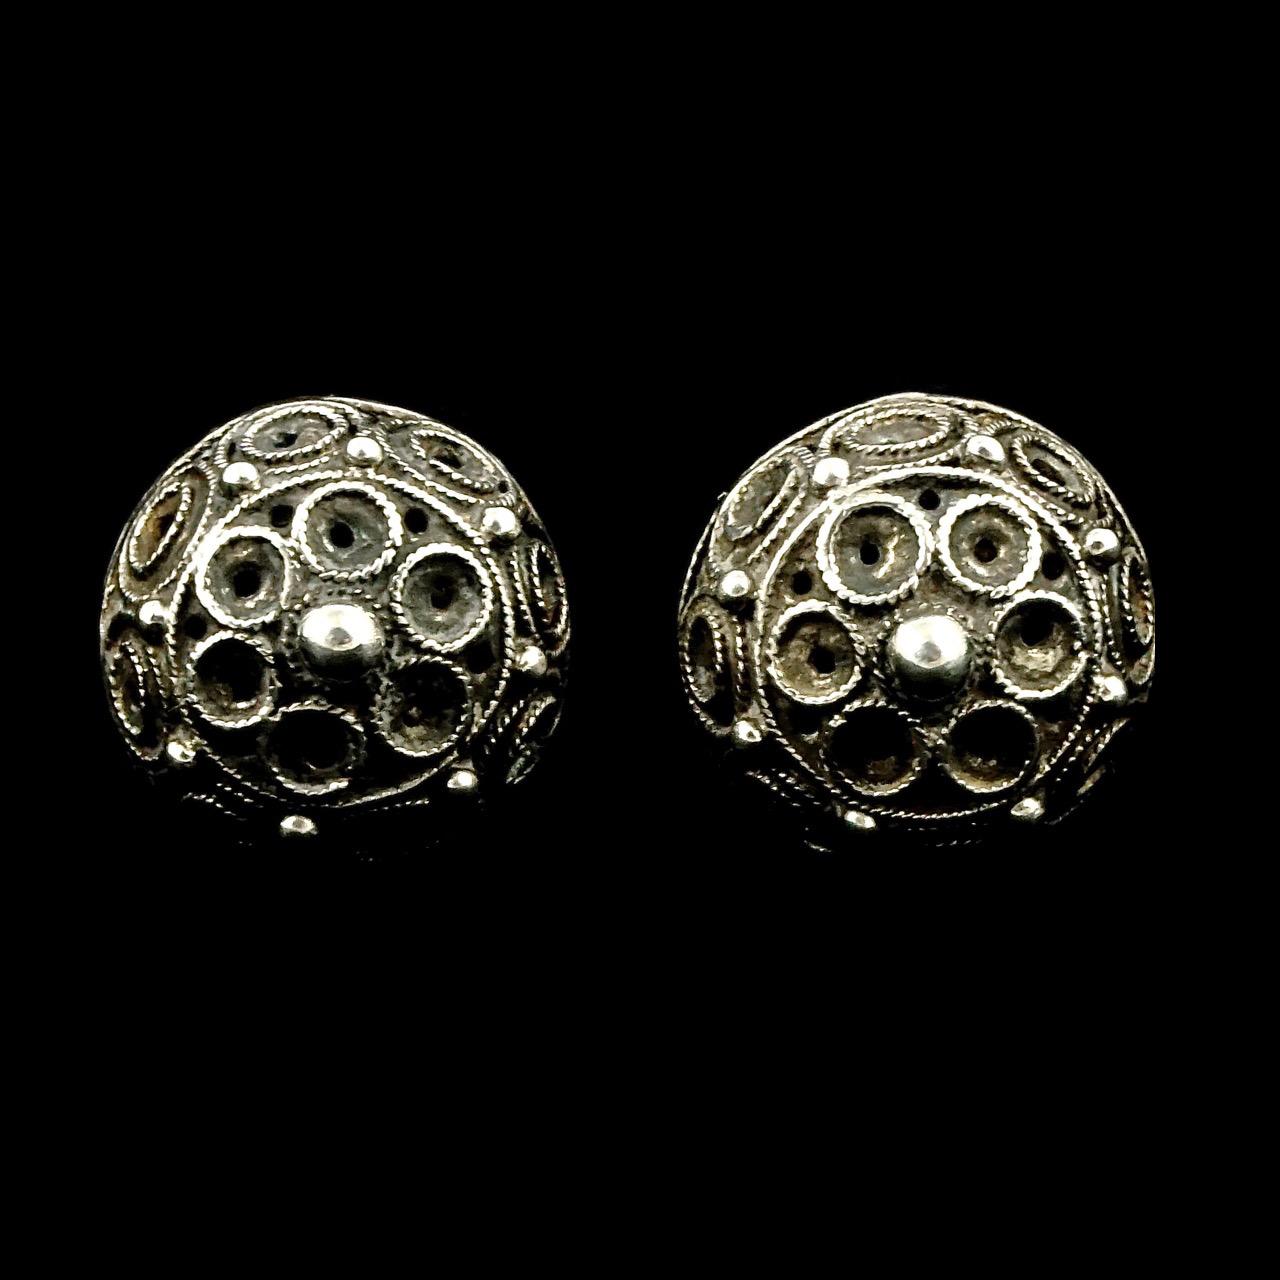 Antique Victorian Silver Etruscan Revival Dome Earrings 2